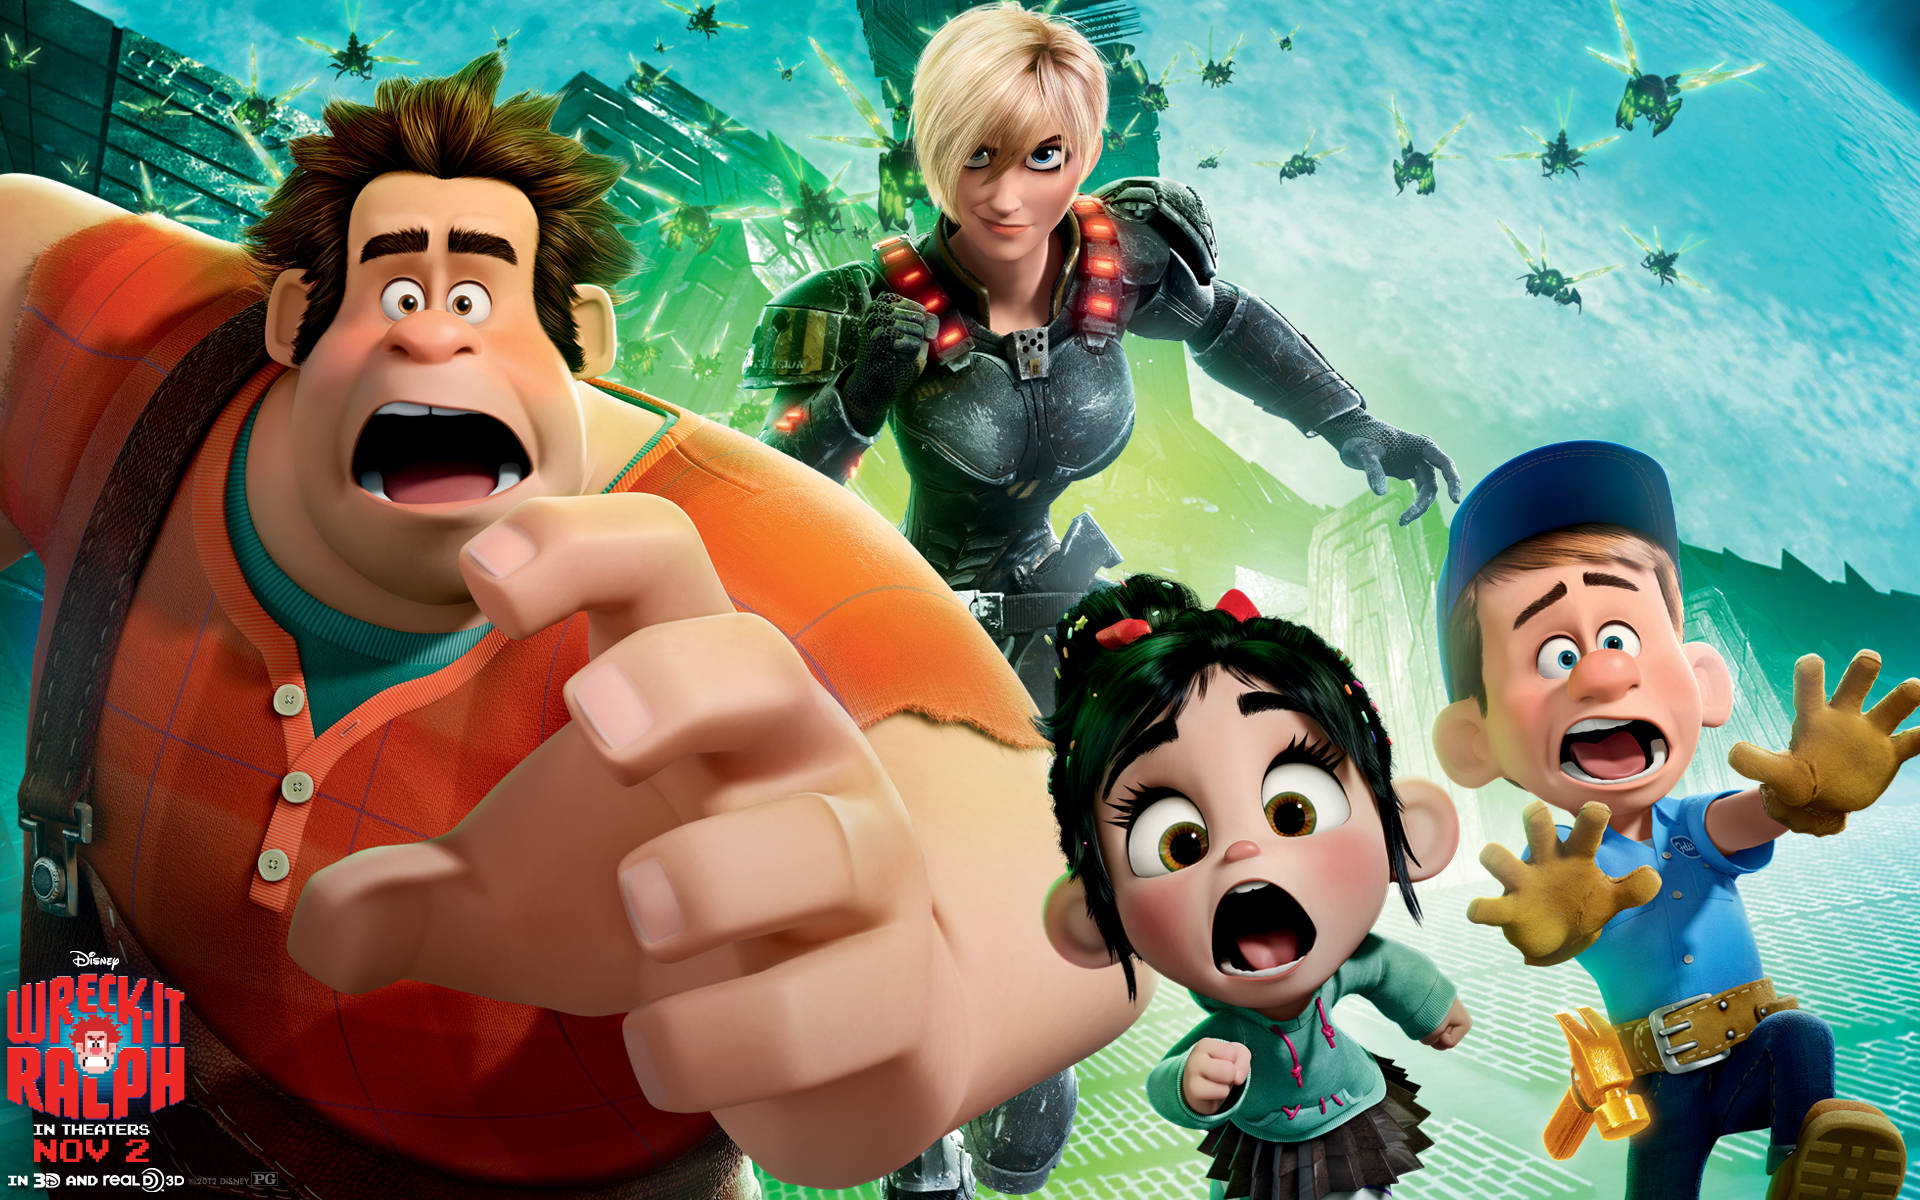 Wreck-It Ralph 2012 Movie Characters Wallpaper